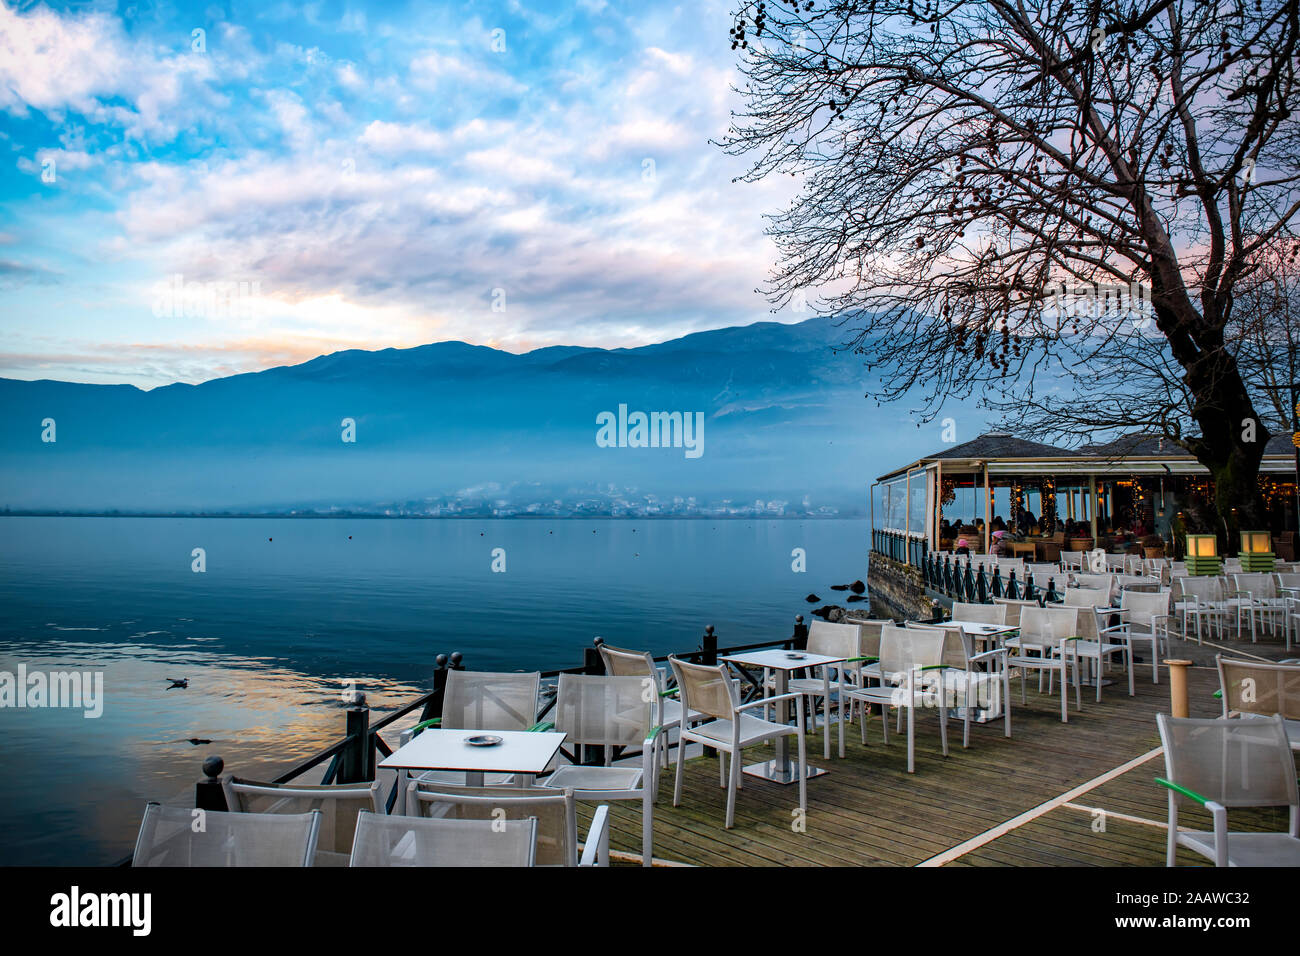 Perfect view to the lake Pamvotis at foggy day, Greece. Stock Photo